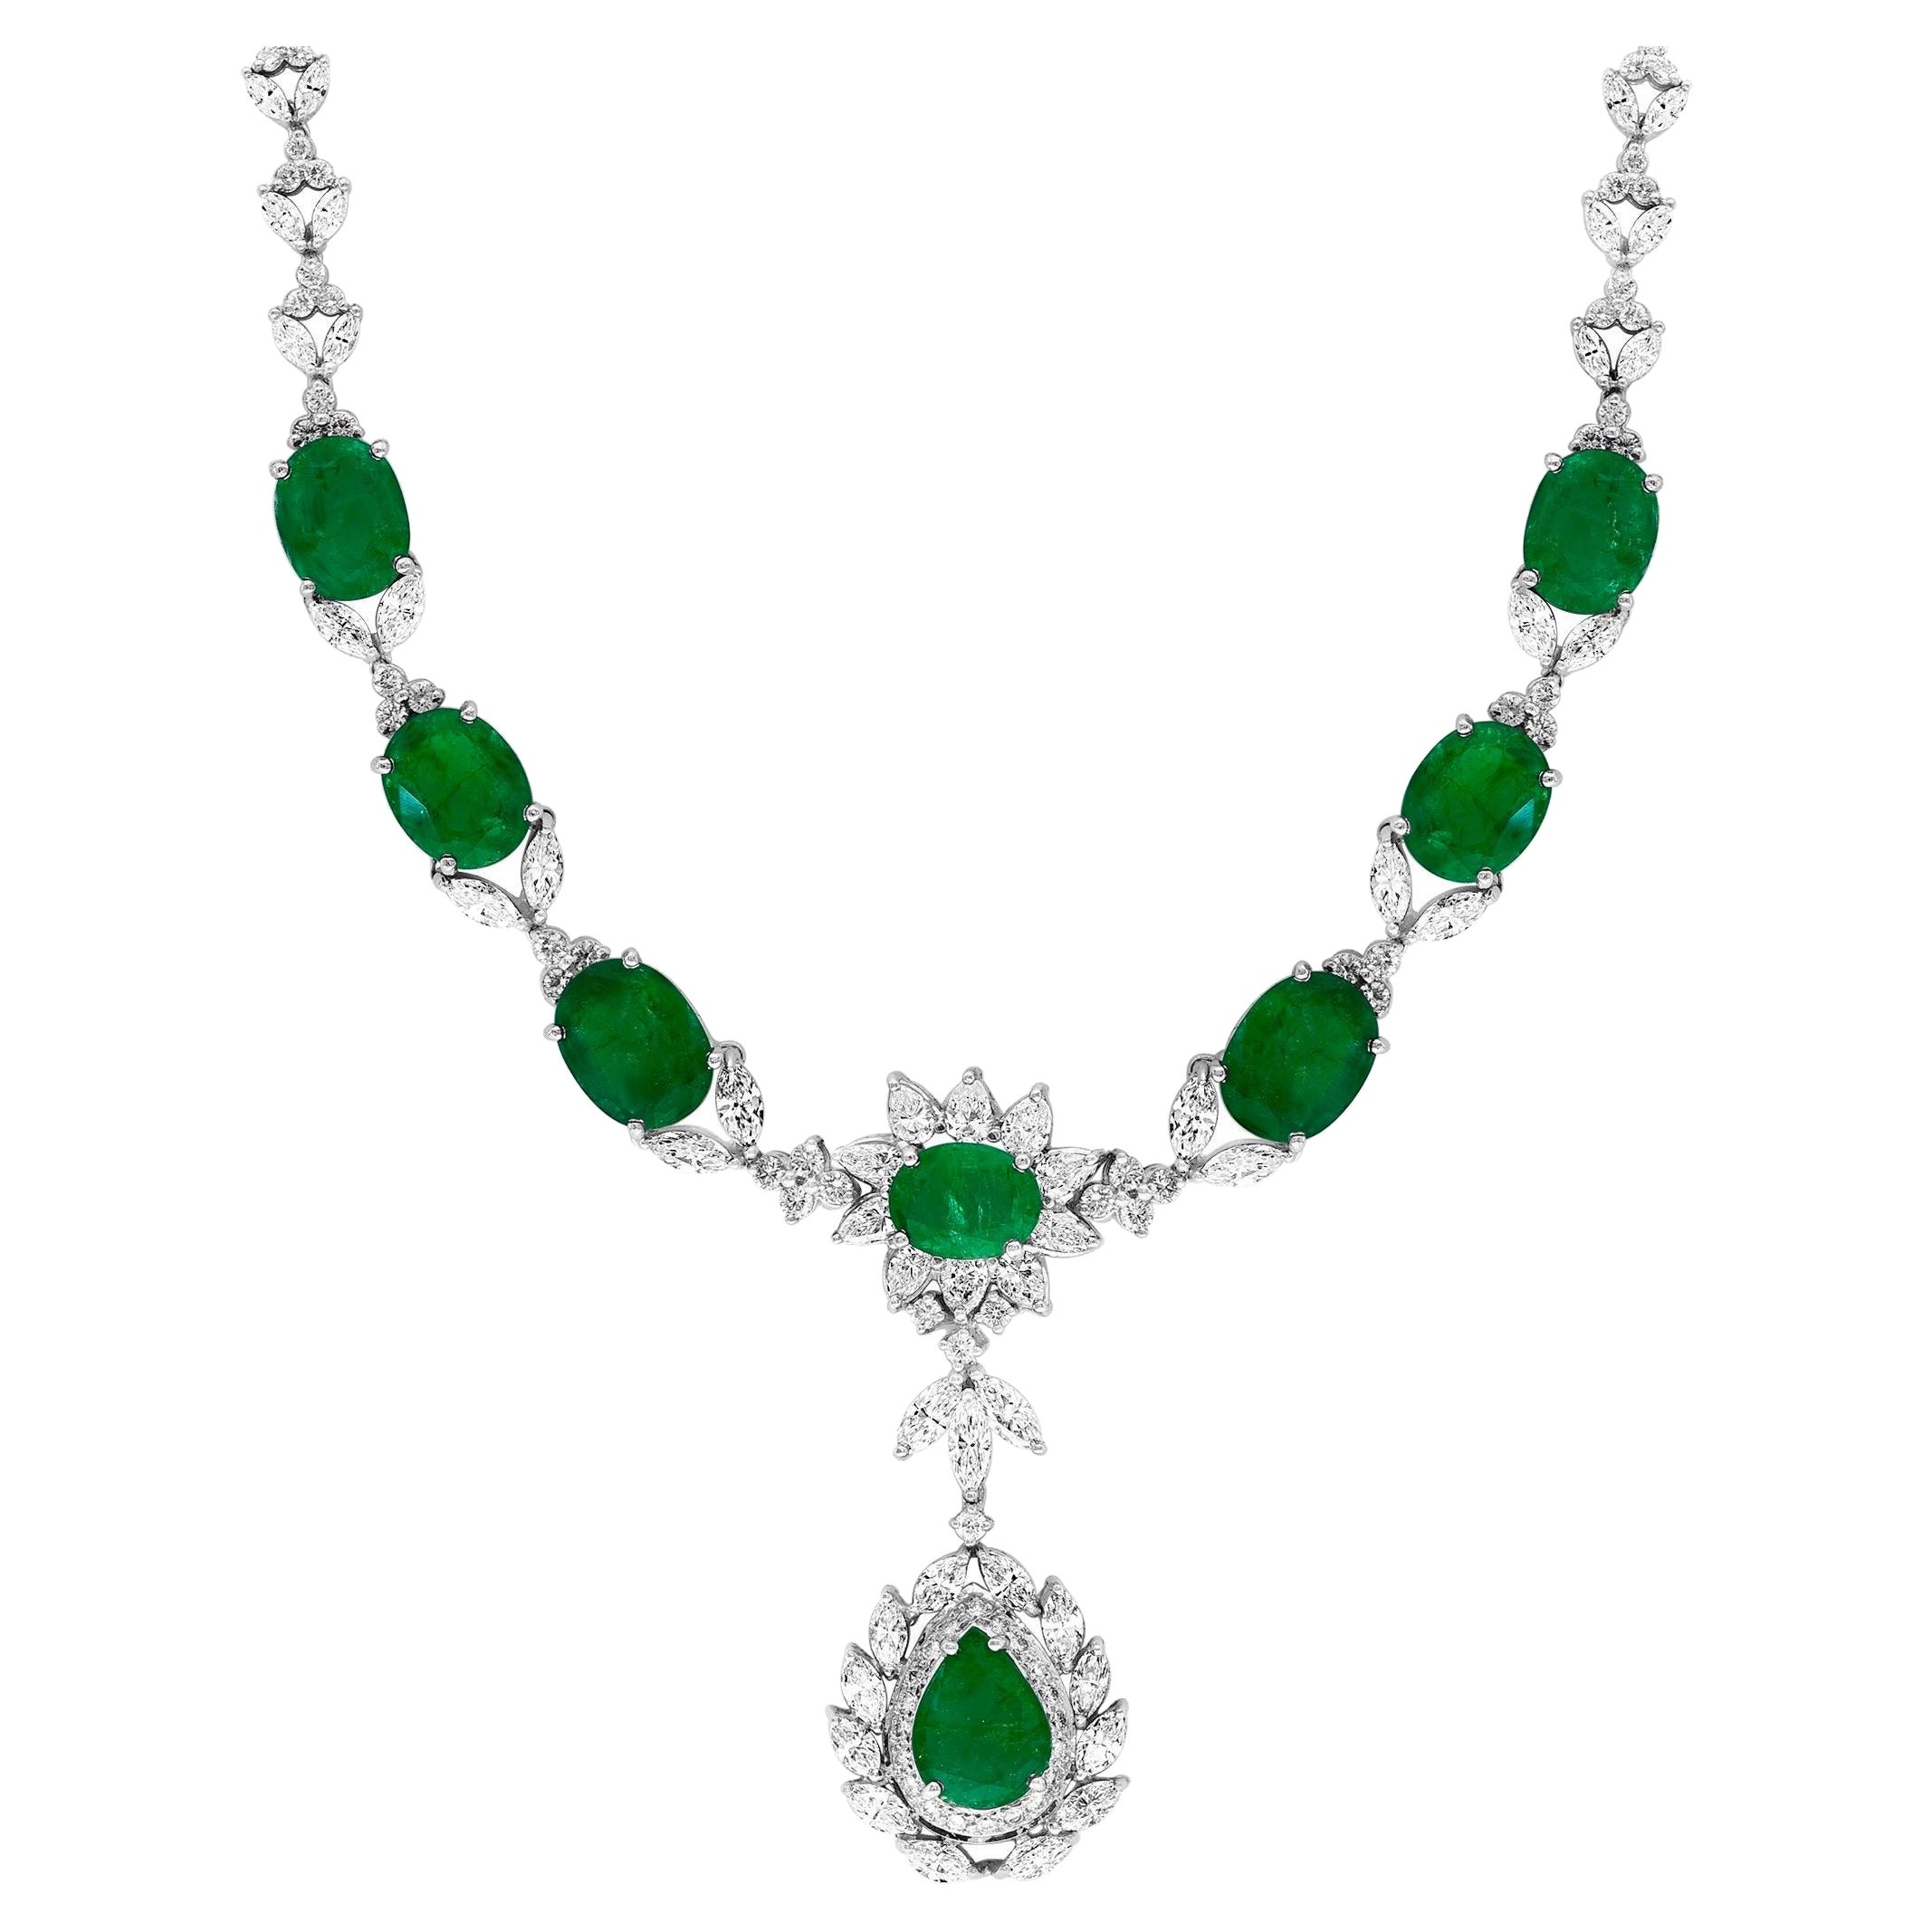 GIA Certified 56 Ct Zambian Emerald & 38 Ct Diamond Fringe Necklace 18KWG Bridal For Sale